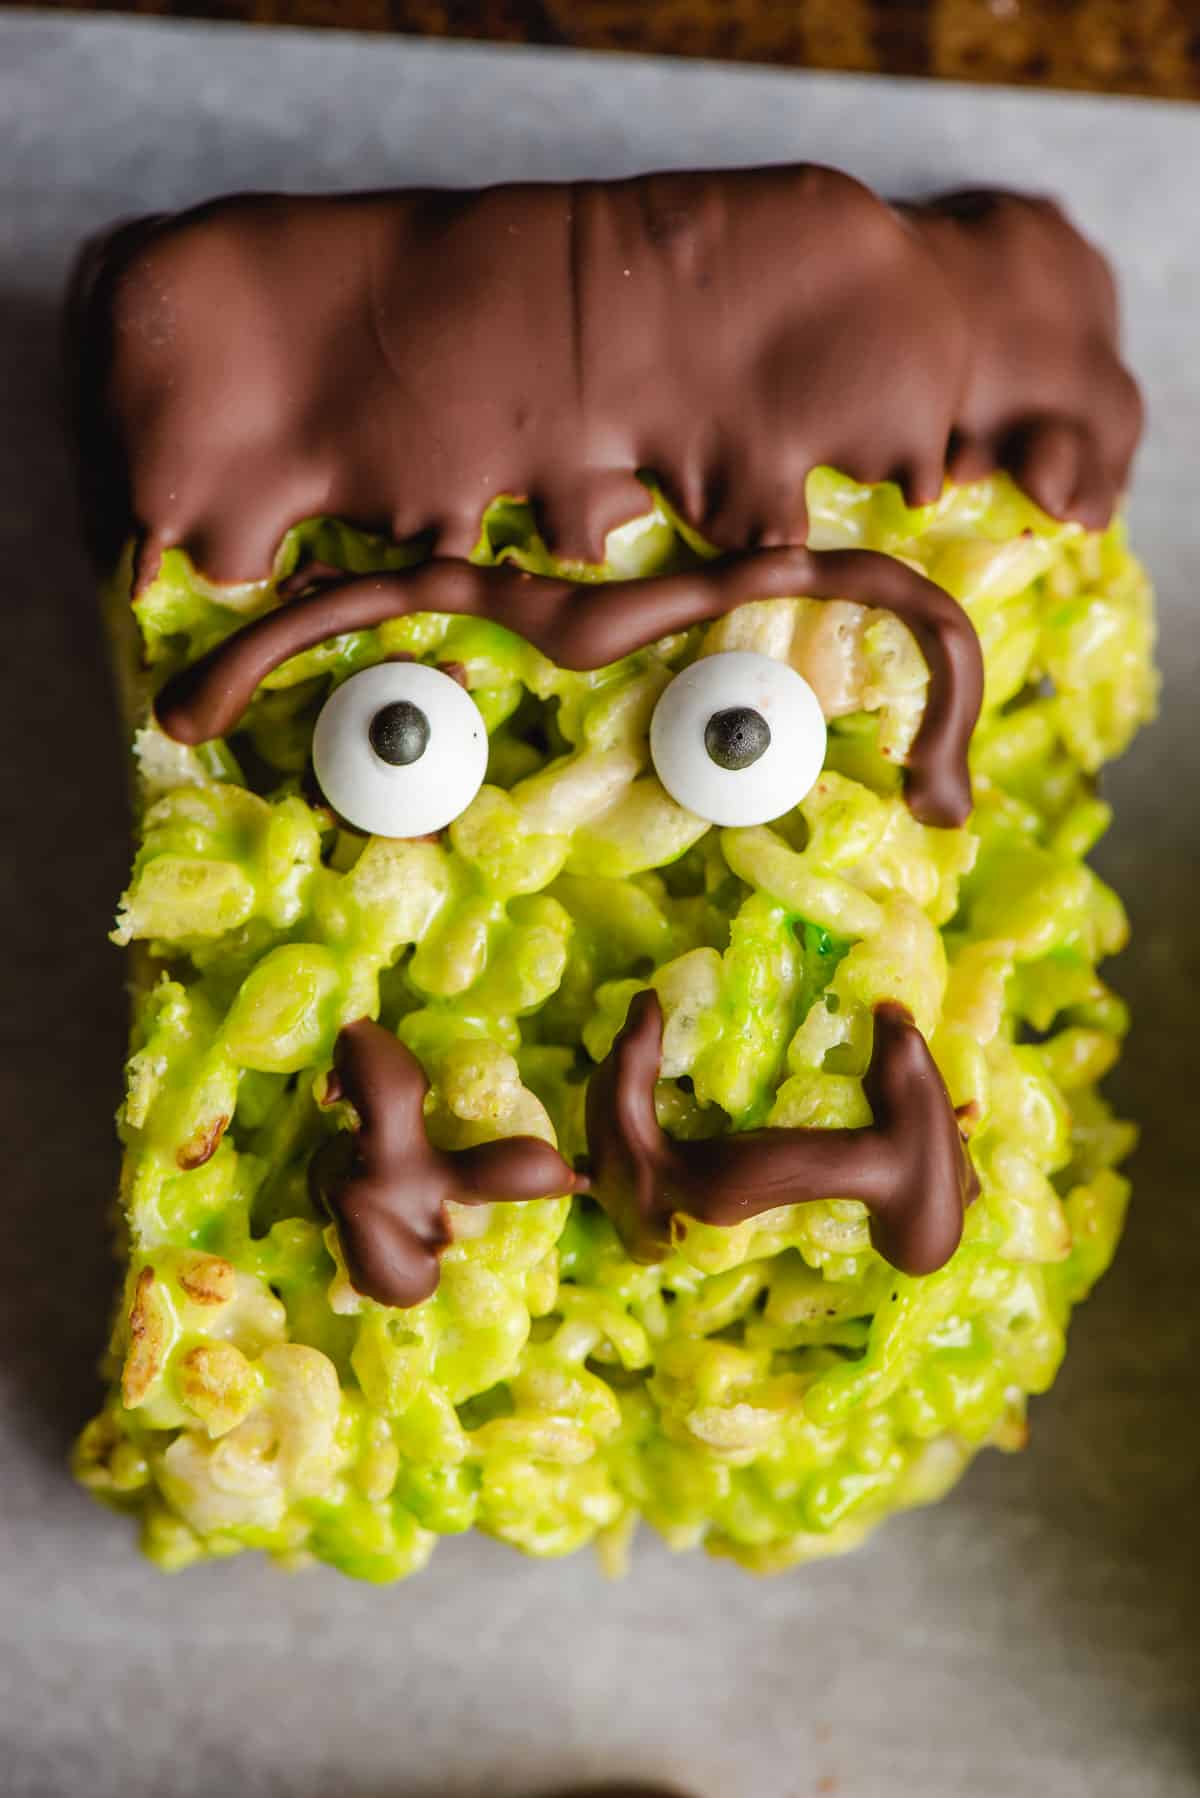 A Frankenstein rice krispie treat with googly eyes, a unibrow, chocolate hair, and stitches for a mouth.